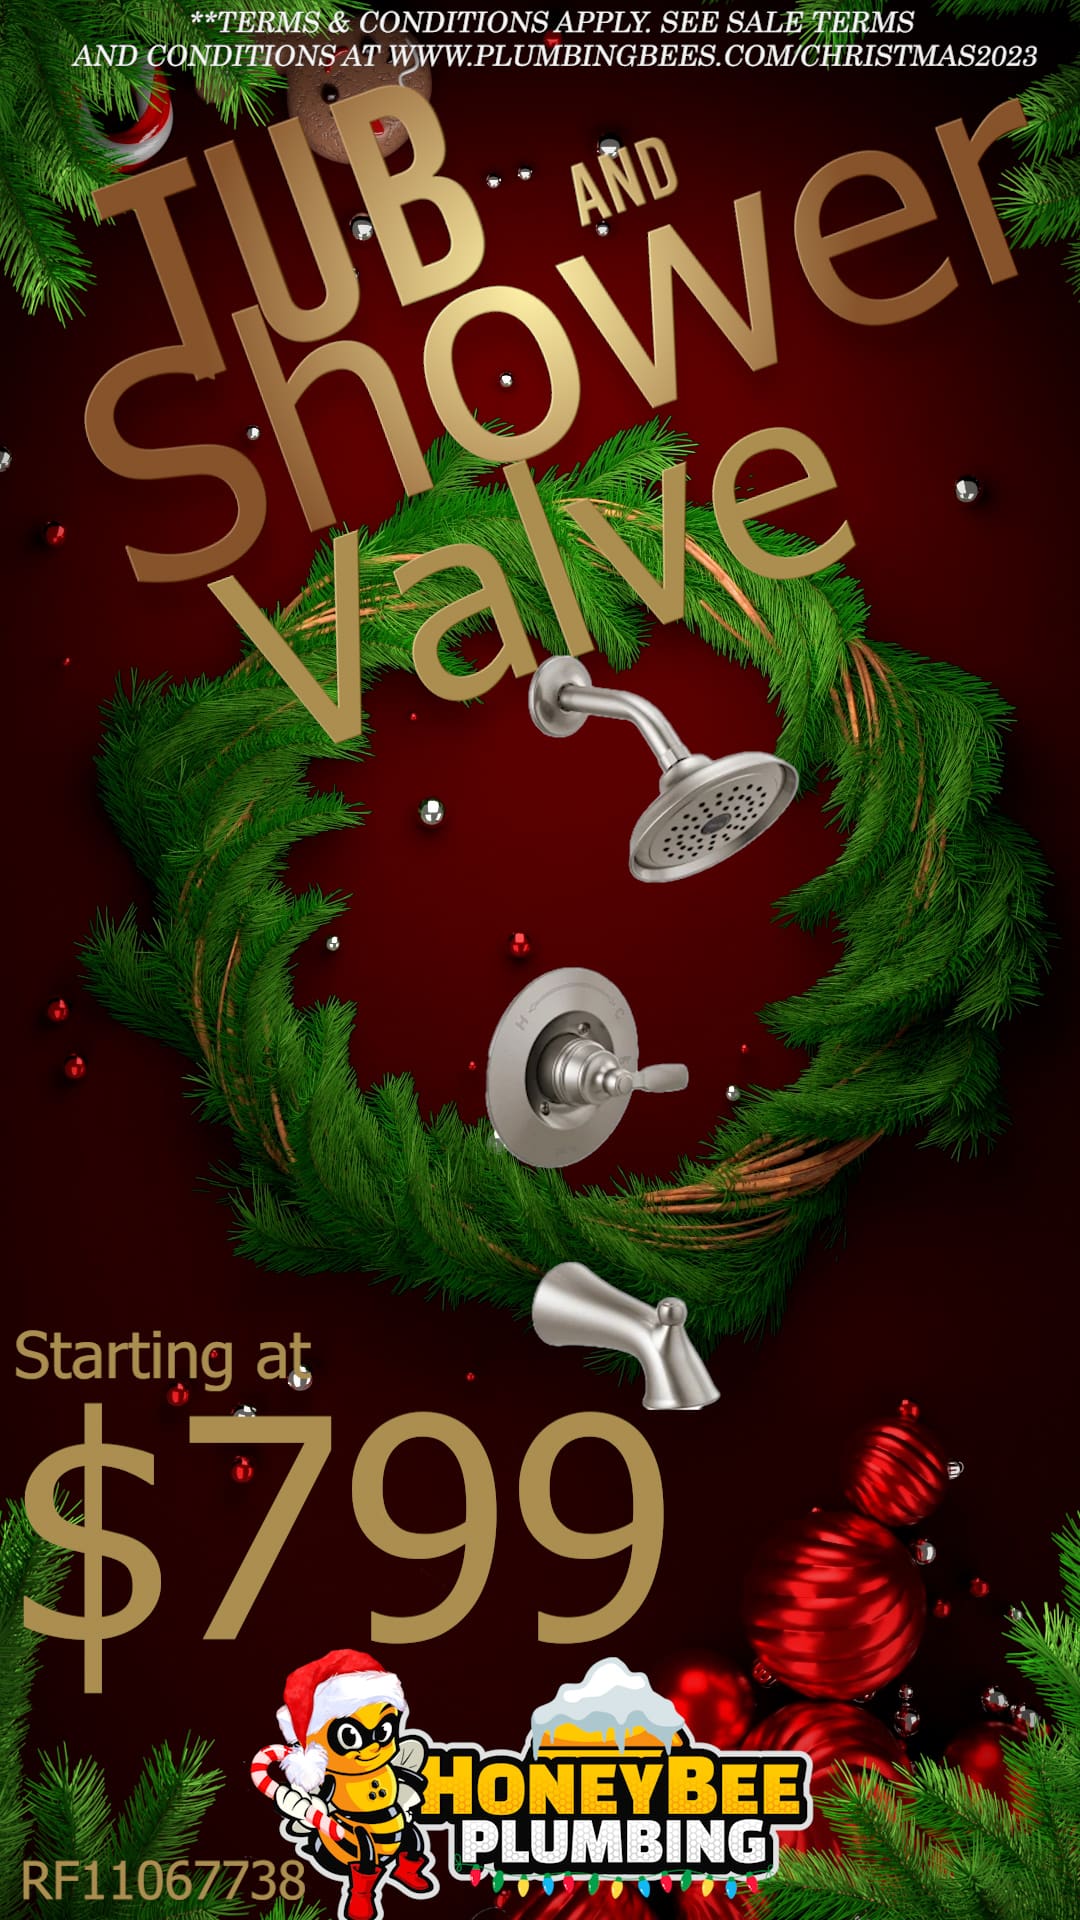 A colorful and festive advertisement for Honey Bee Plumbing's Christmas 2023 special, featuring tub or shower valve replacements starting at 9. The image showcases a shower valve against a holiday-themed backdrop, adorned with festive ribbons, snow, and a color scheme of red, green, and blue. The Honey Bee Plumbing logo is prominently featured, enhancing the seasonal feel of the promotion.